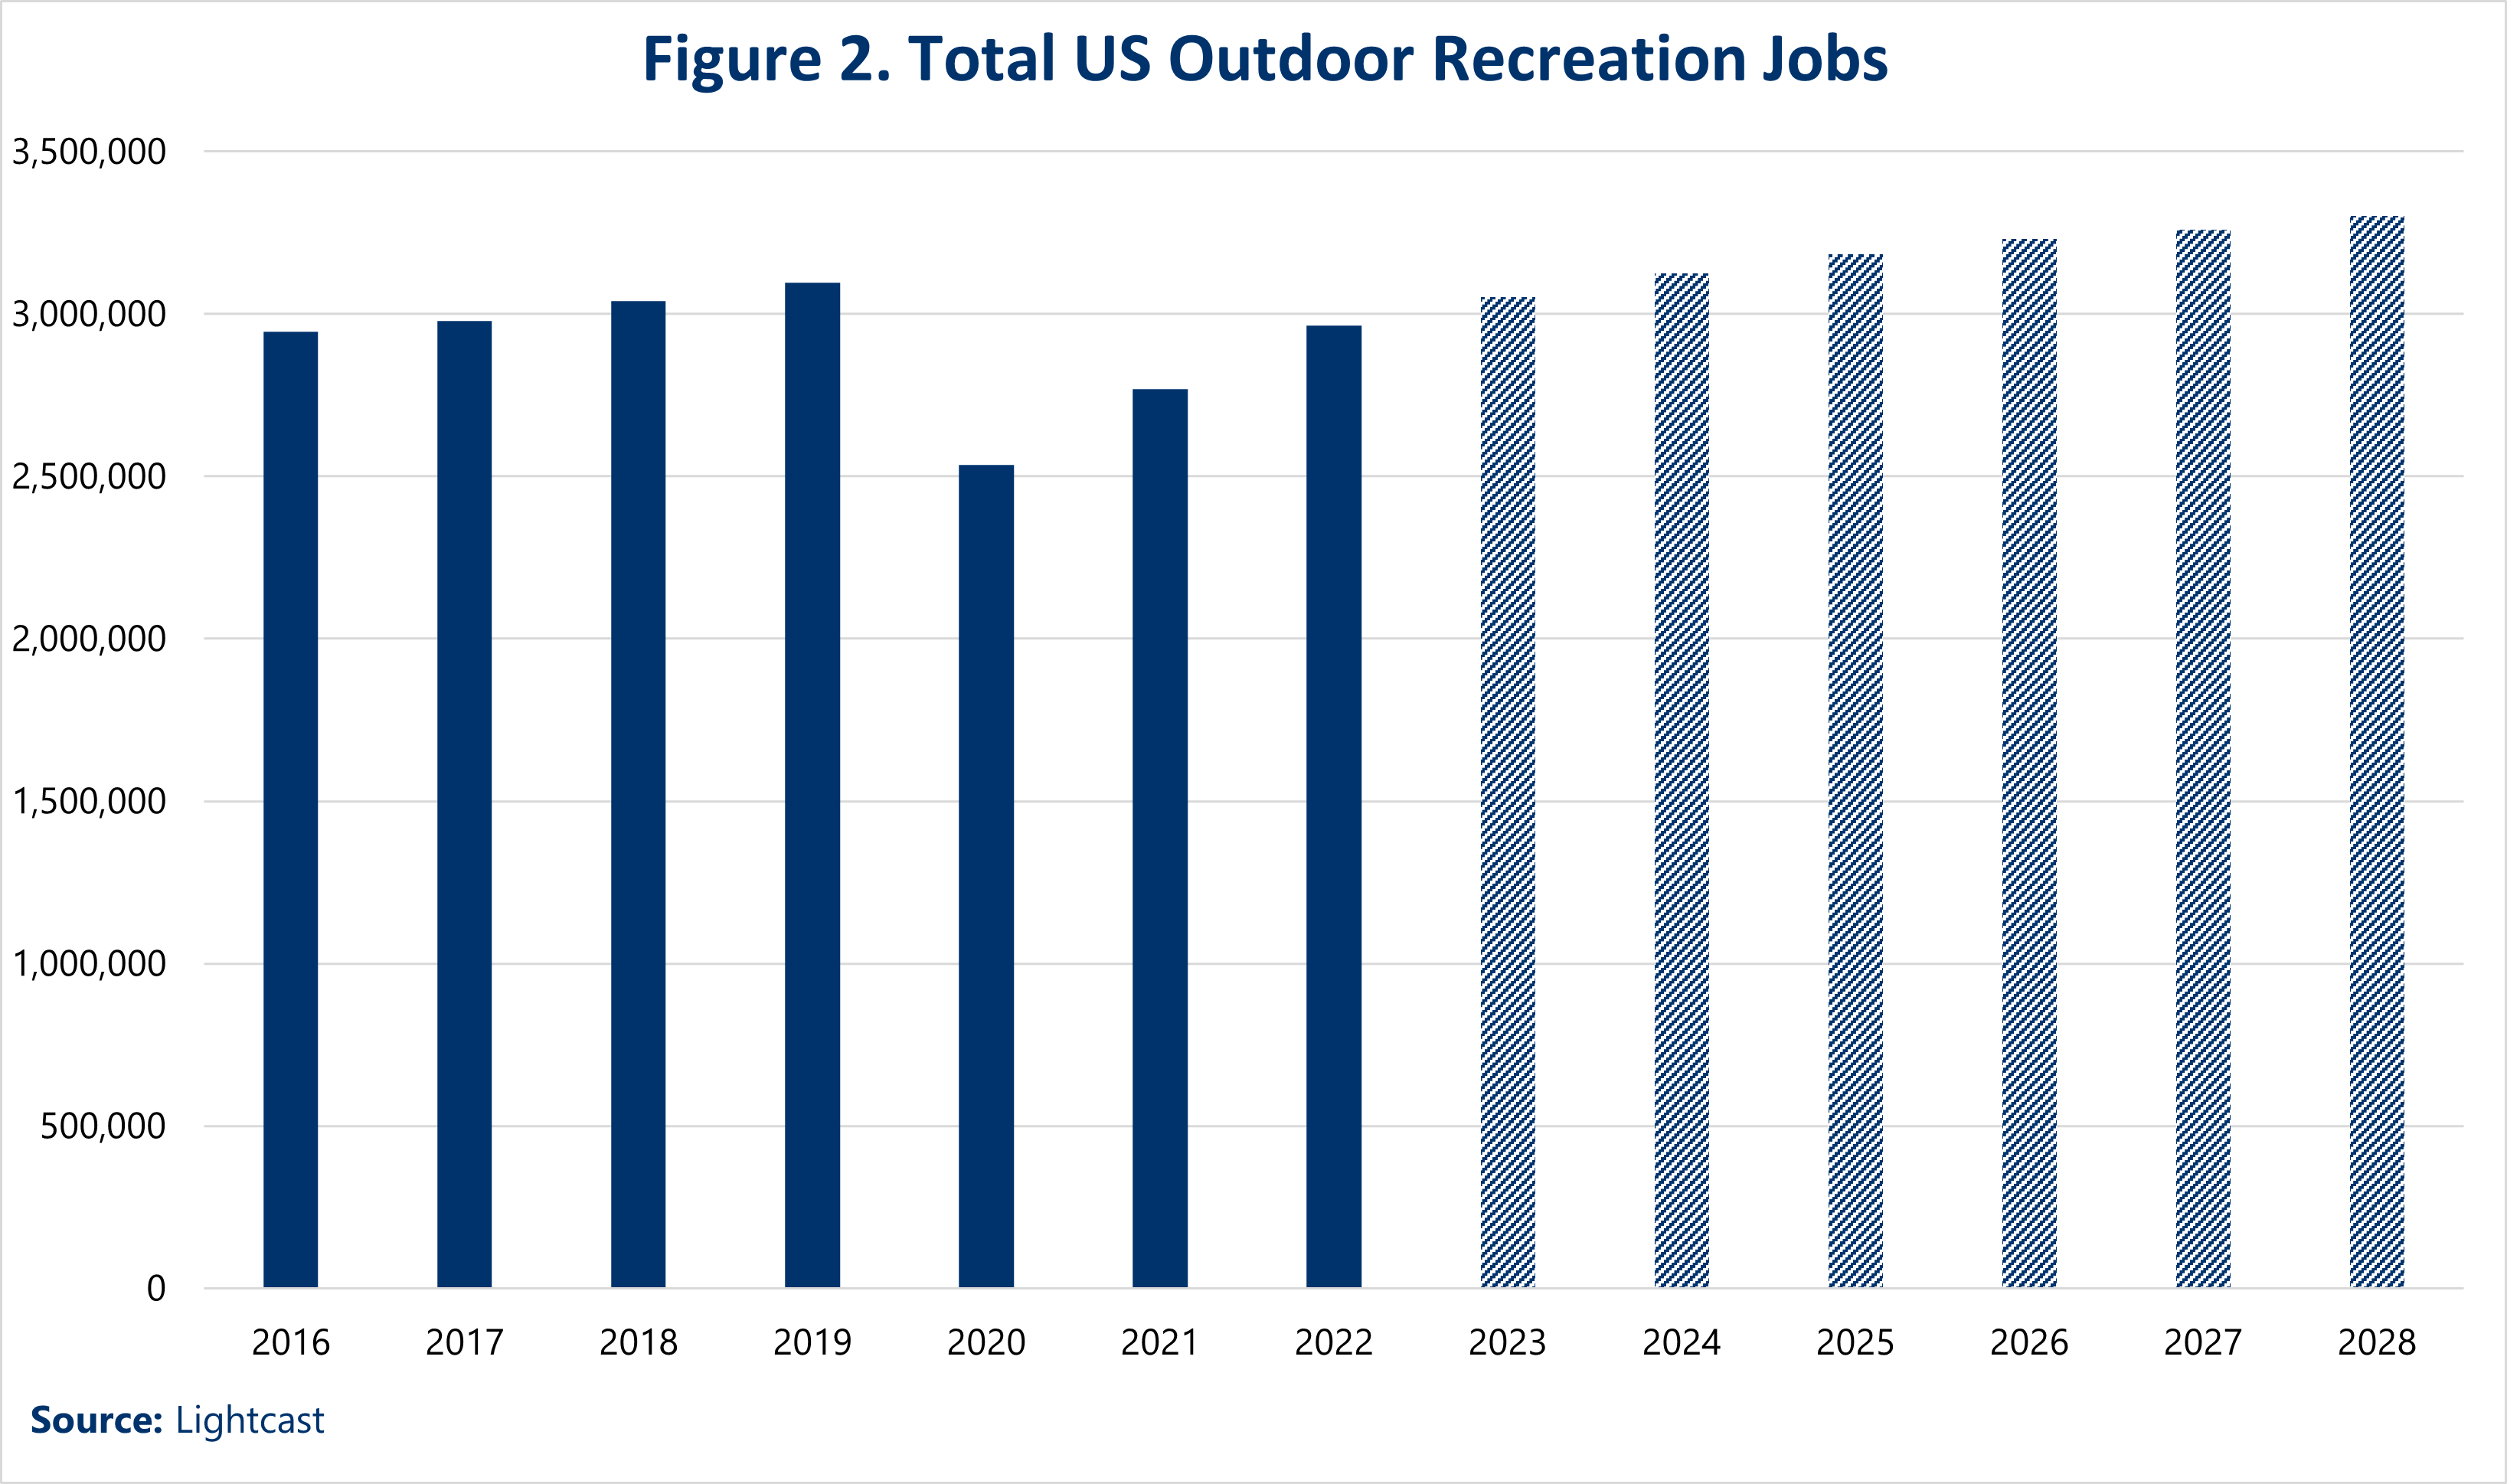 Figure 2. Total US Outdoor Recreation Jobs, 2016-2028. A bar chart shows job growth from 2016 to 2019, a drop in 2020 during the pandemic, and steady recovery in 2021 and 2022. It projects continued growth through 2028 at rates higher than before the pandemic. Source: Lightcast